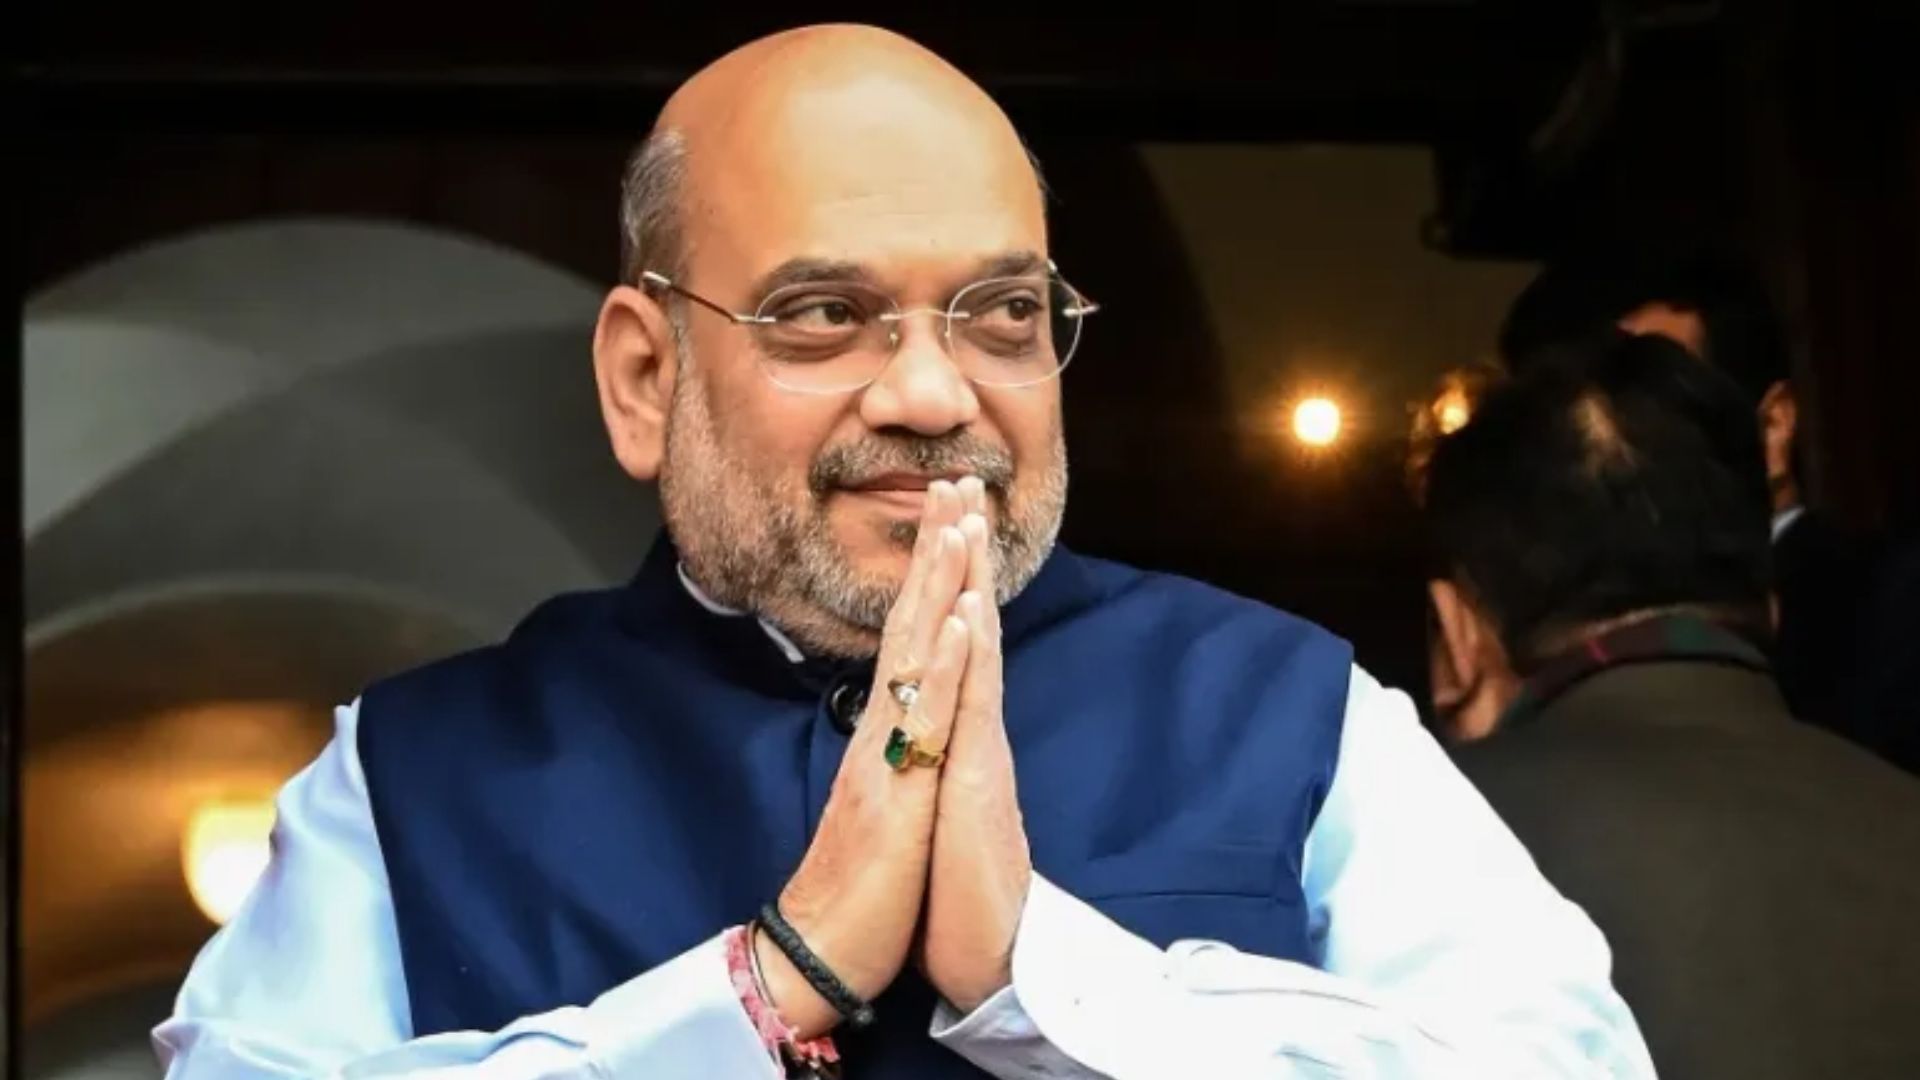 Indian Home Minister Amit Shah confirms Citizenship Amendment Act will be implemented